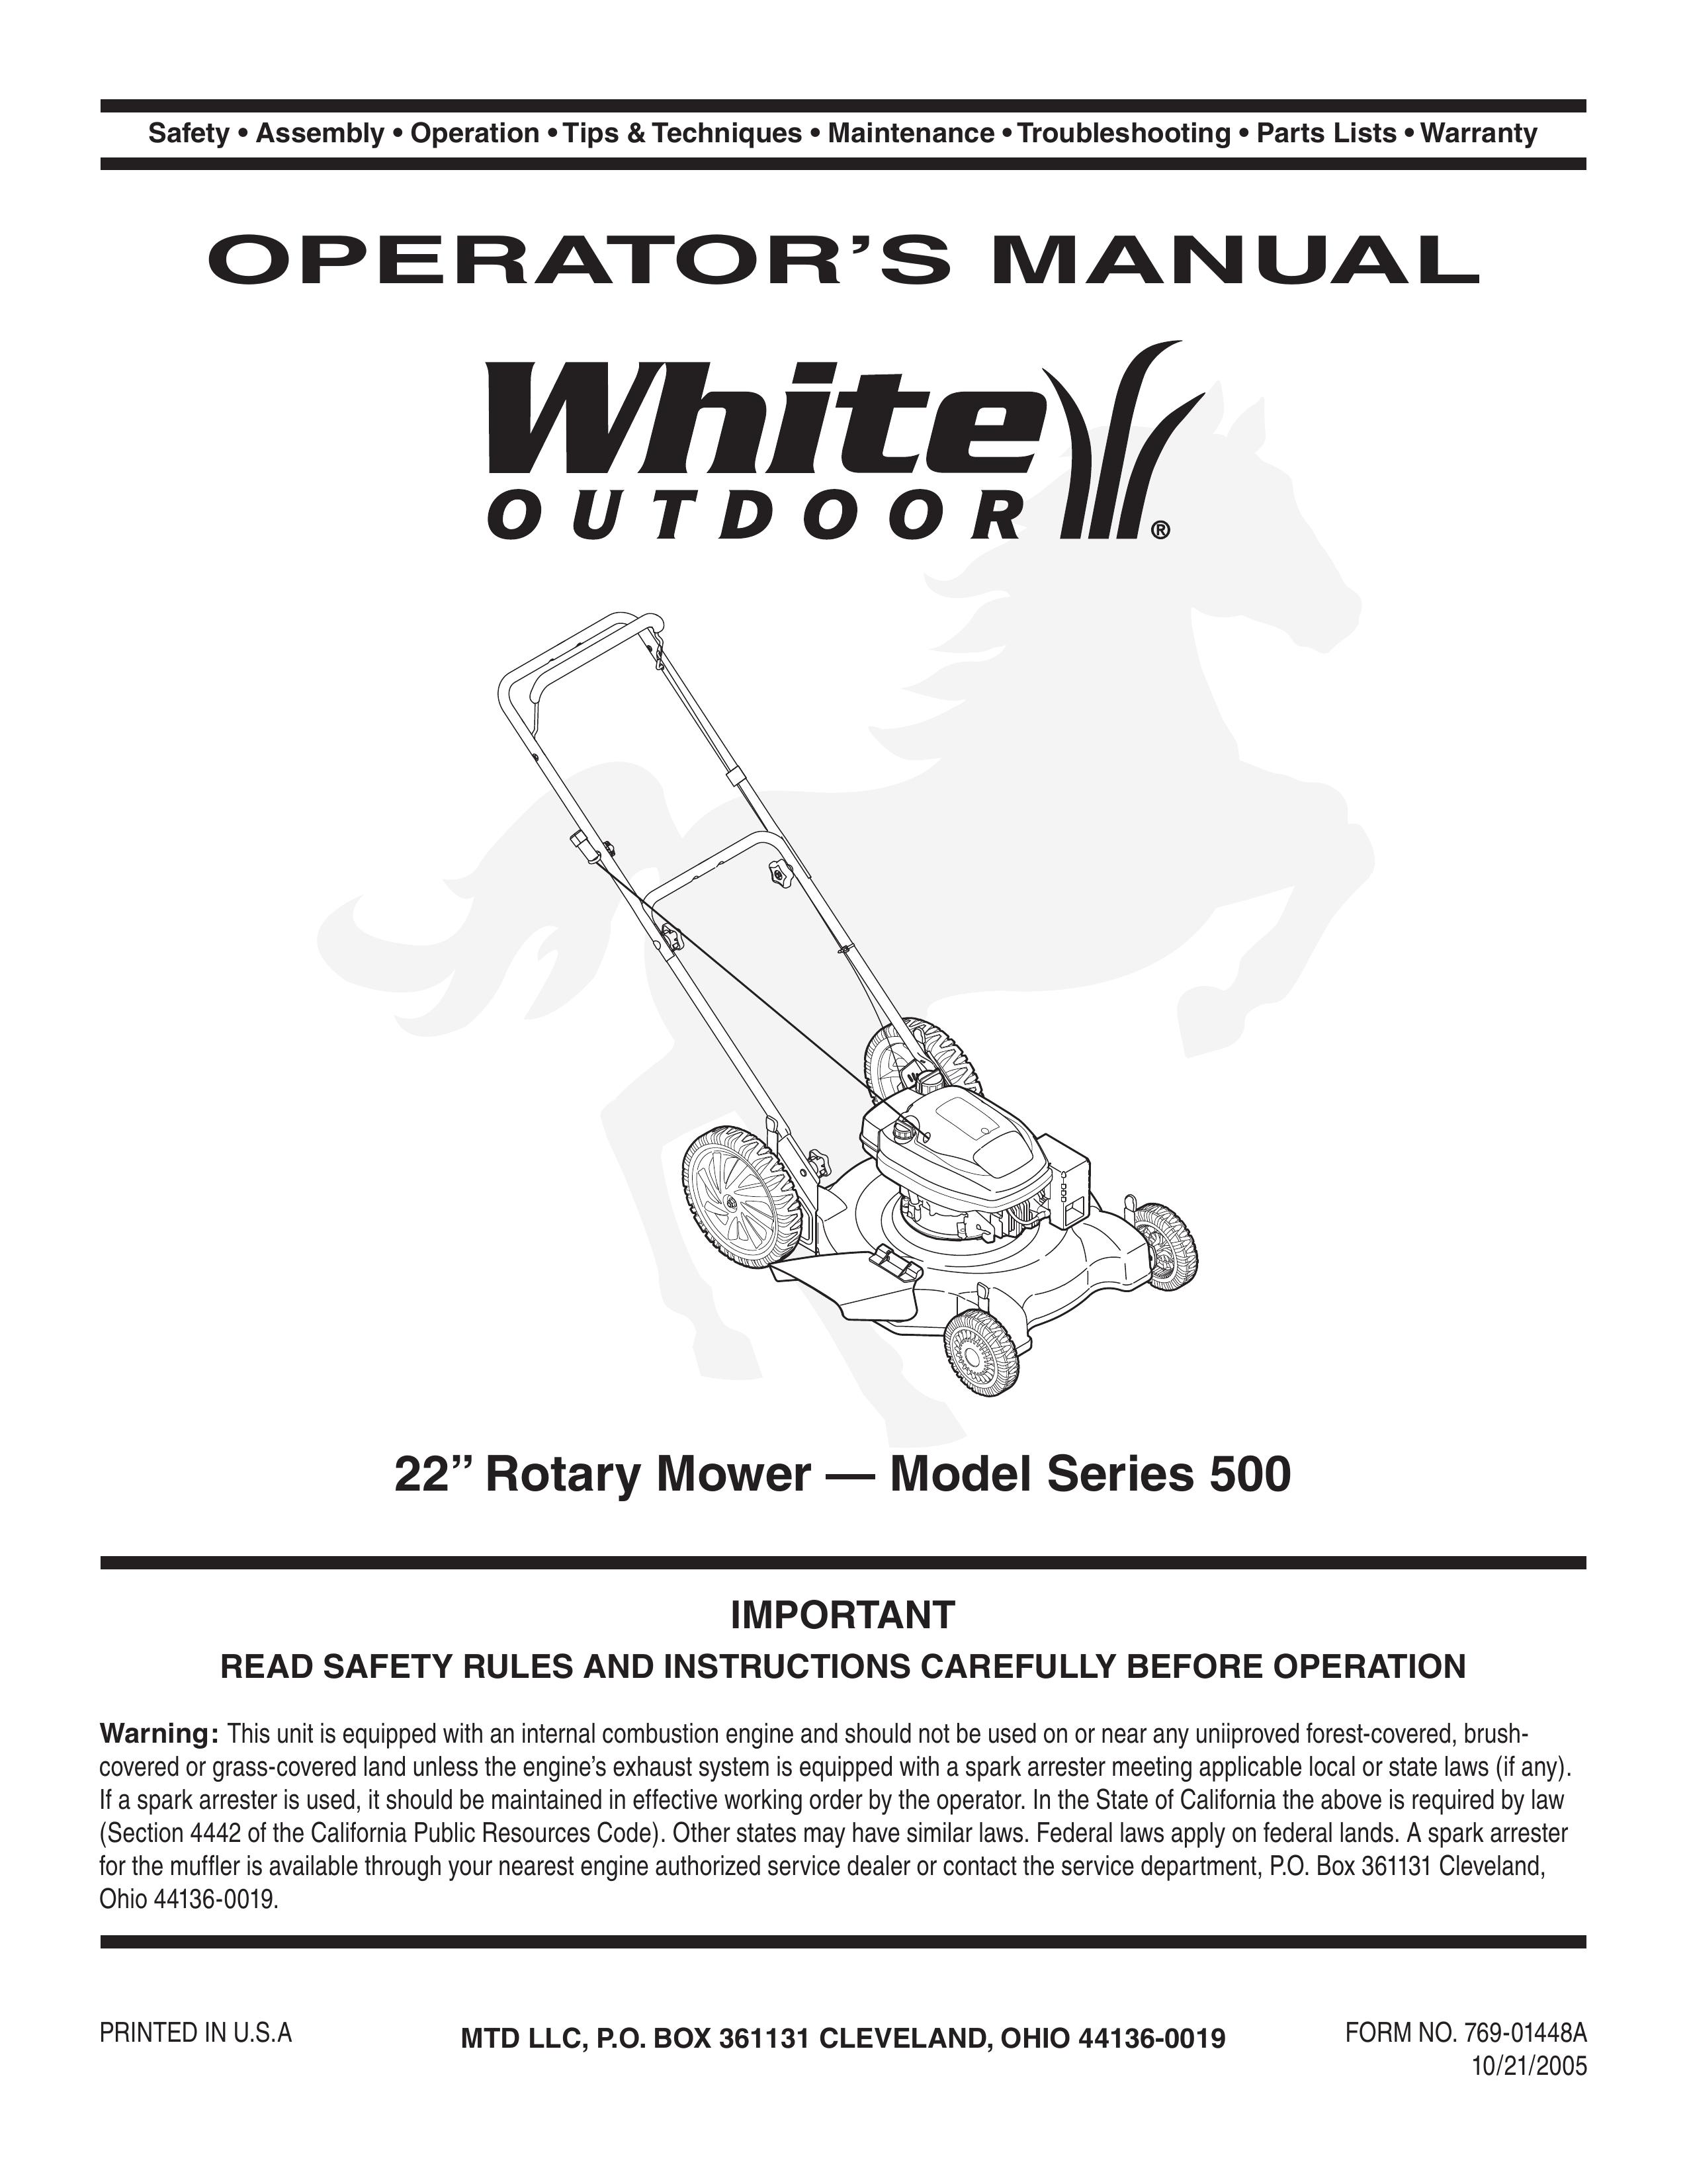 White Outdoor 500 Lawn Mower User Manual